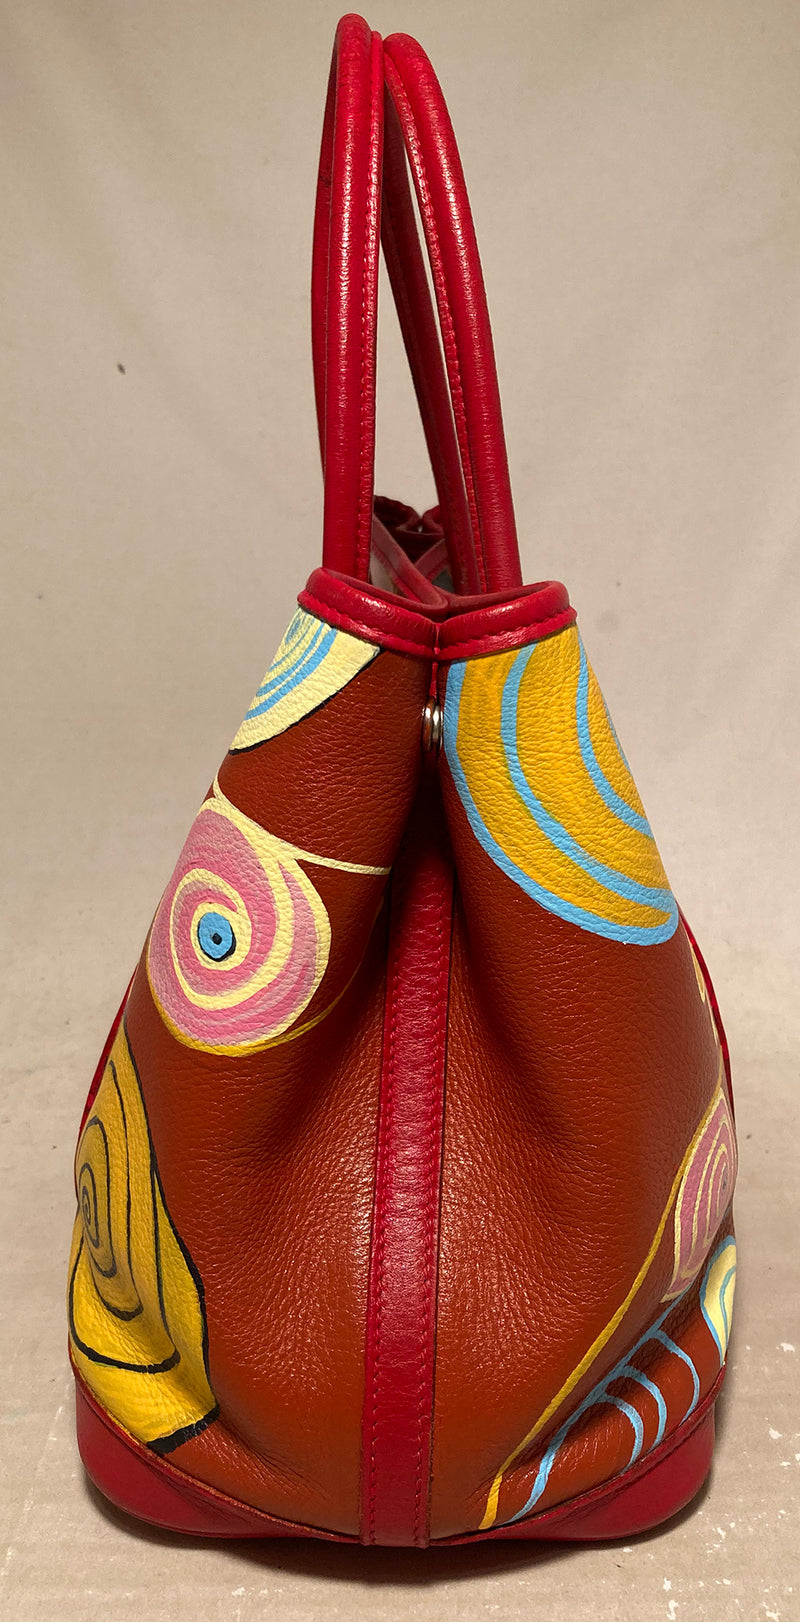 Hermes Garden Party Leather Tote Bag